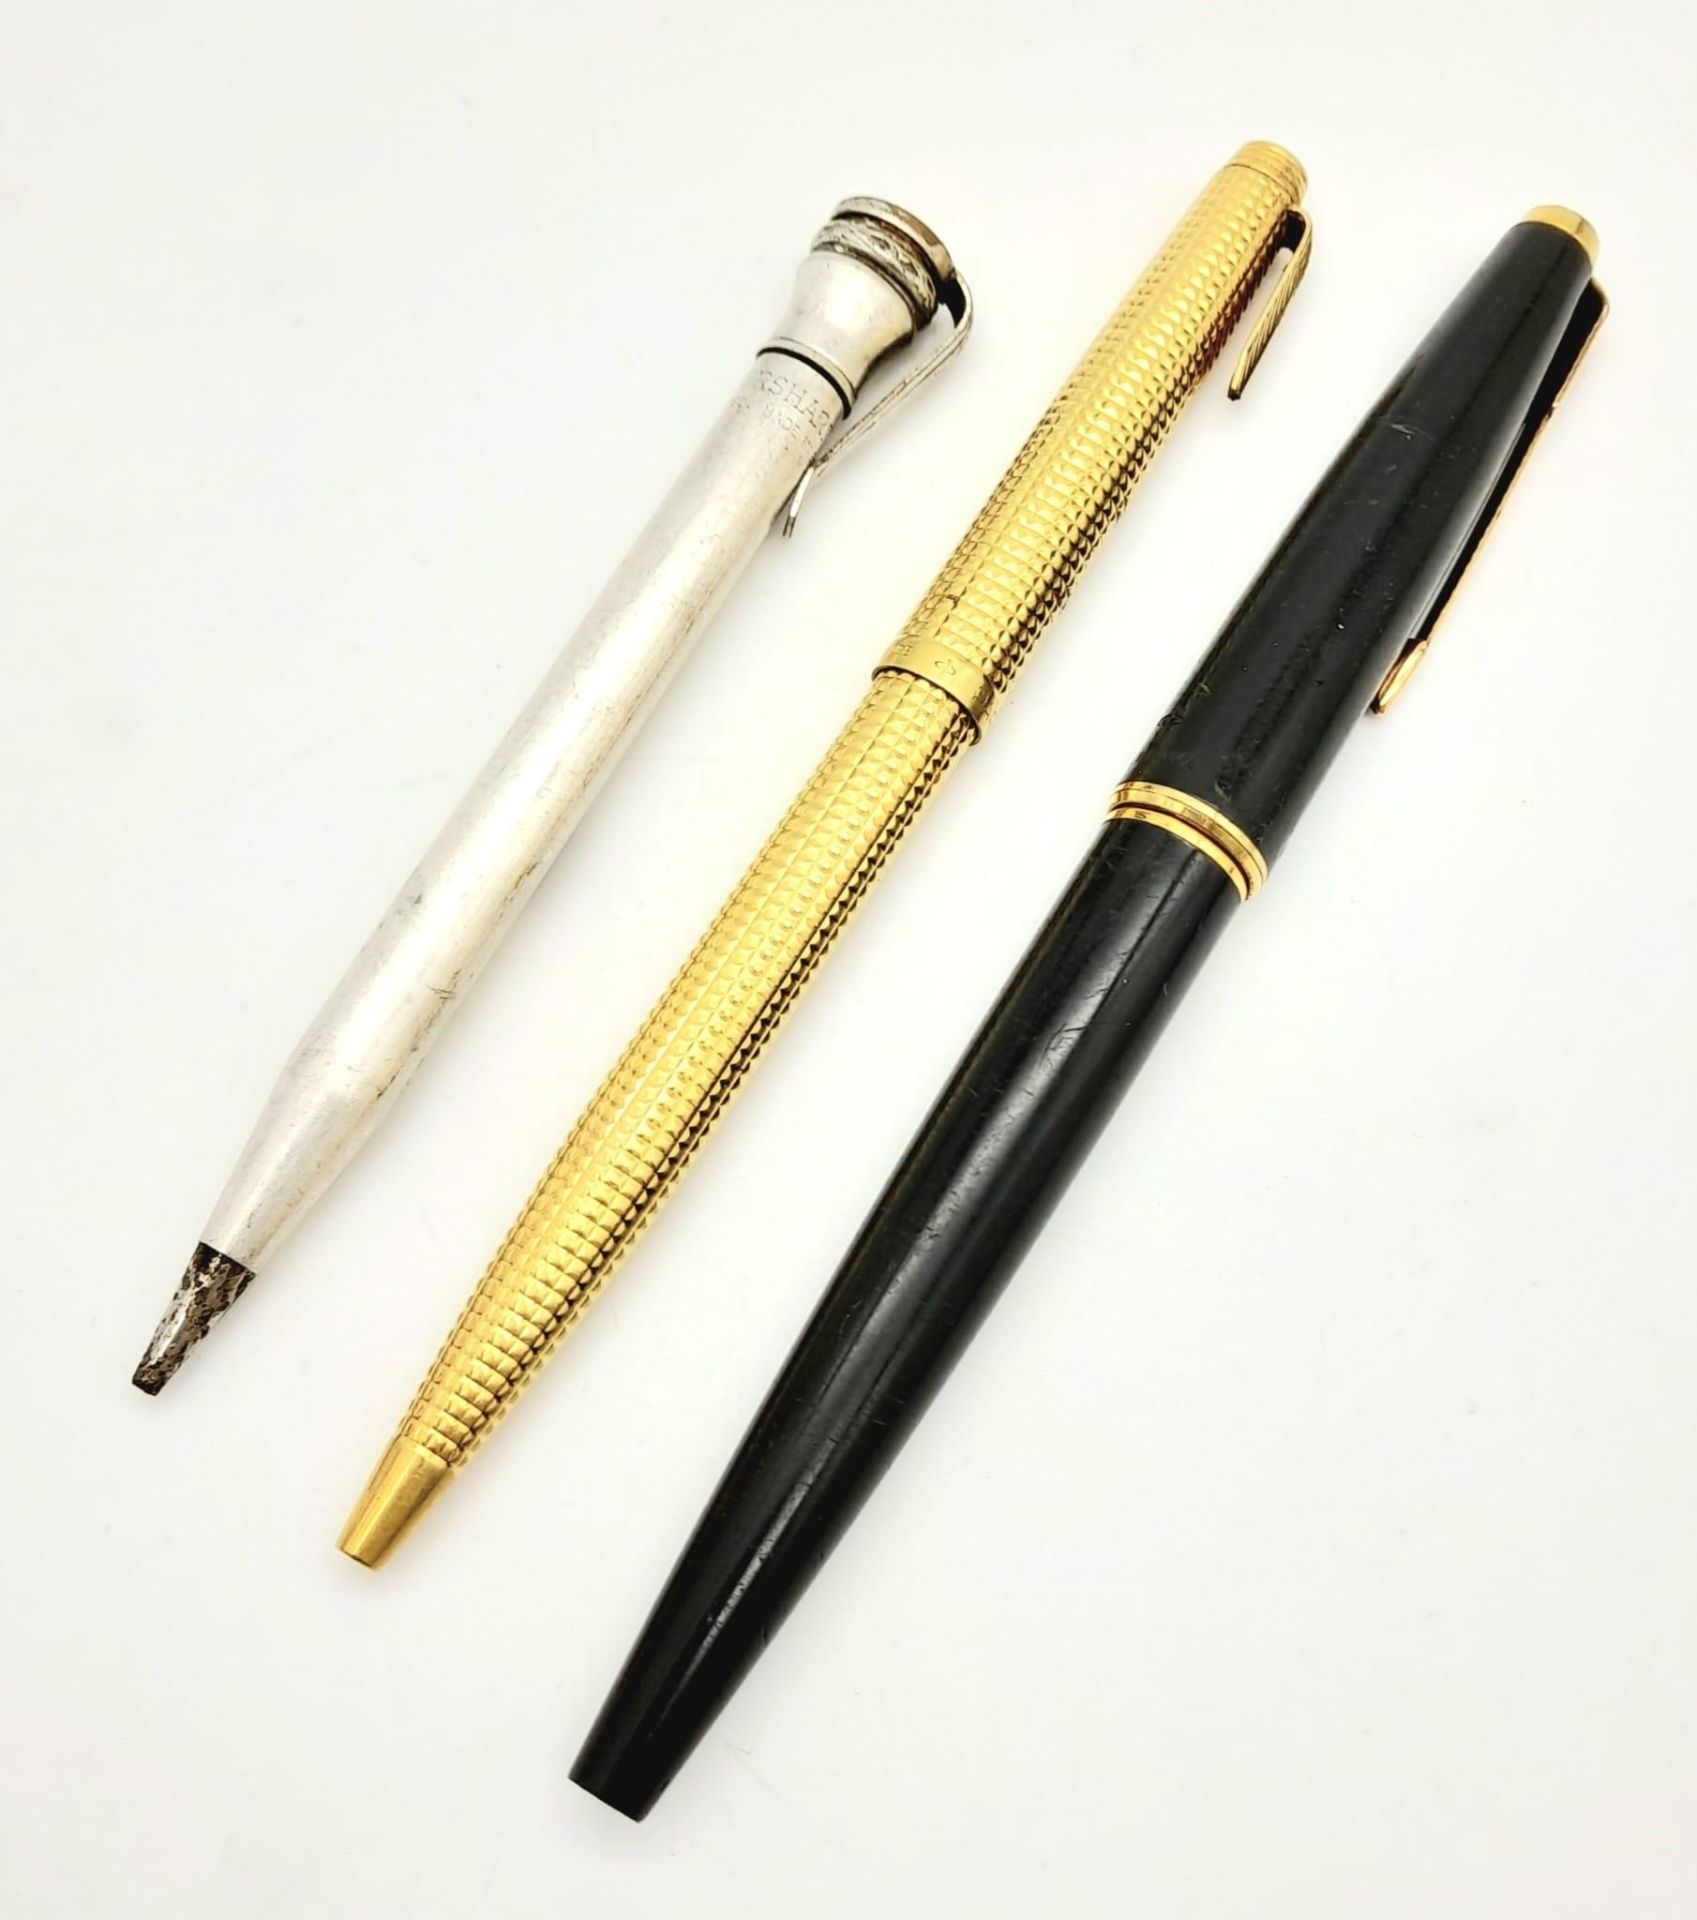 A PARKER FOUNTAIN PEN WITH GOLD NIB PLUS 2 OTHER PENS ,